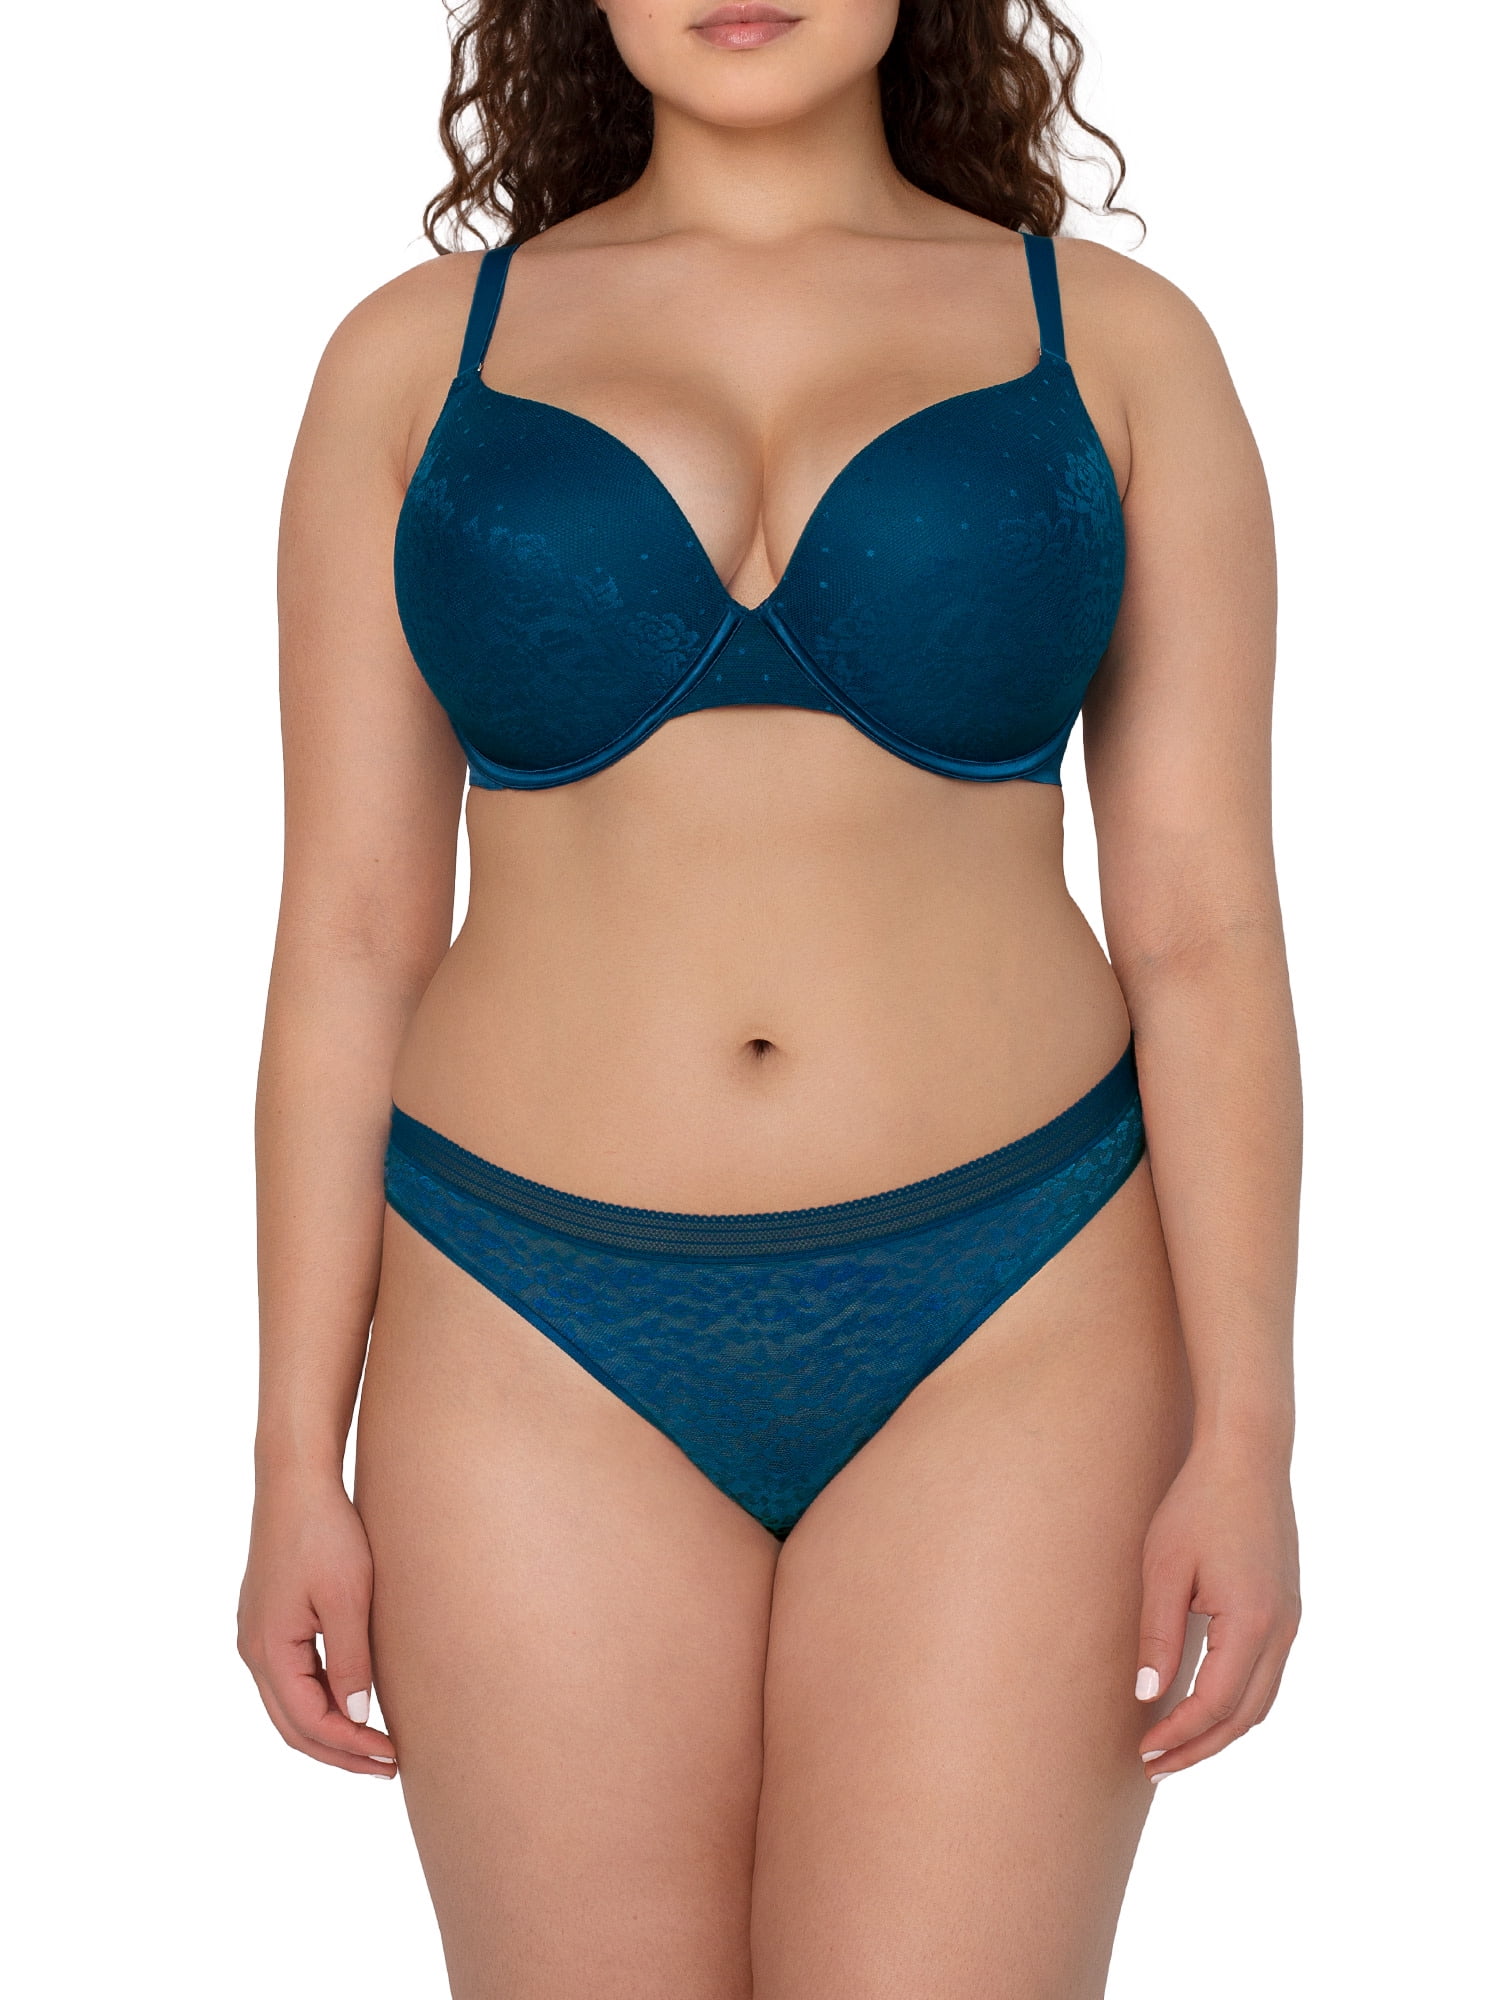 Secret Treasures bra NWT, 40D,Push-up style, teal, underwire, #6706 Size  undefined - $11 New With Tags - From Donna